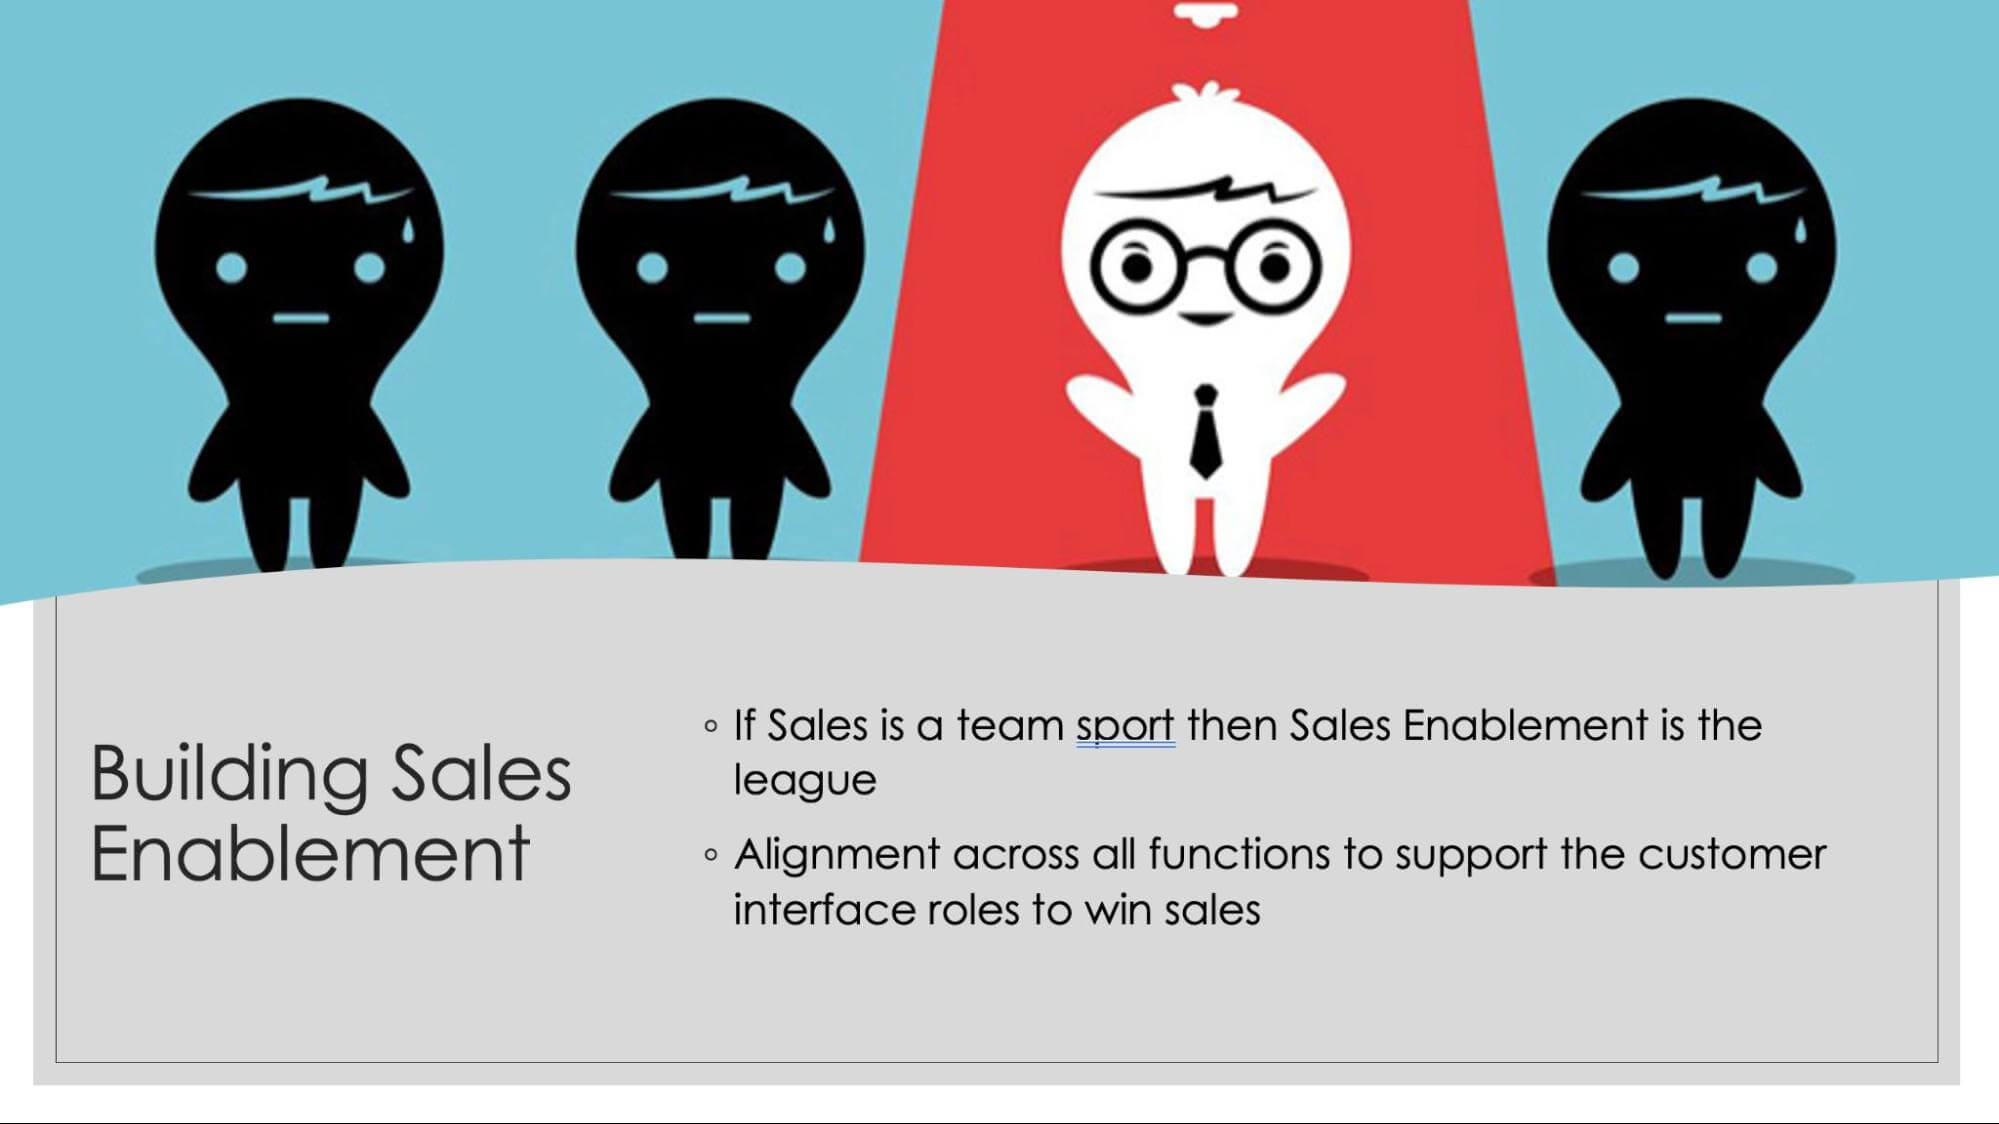 If sales is a team sport, then sales enablement is the league